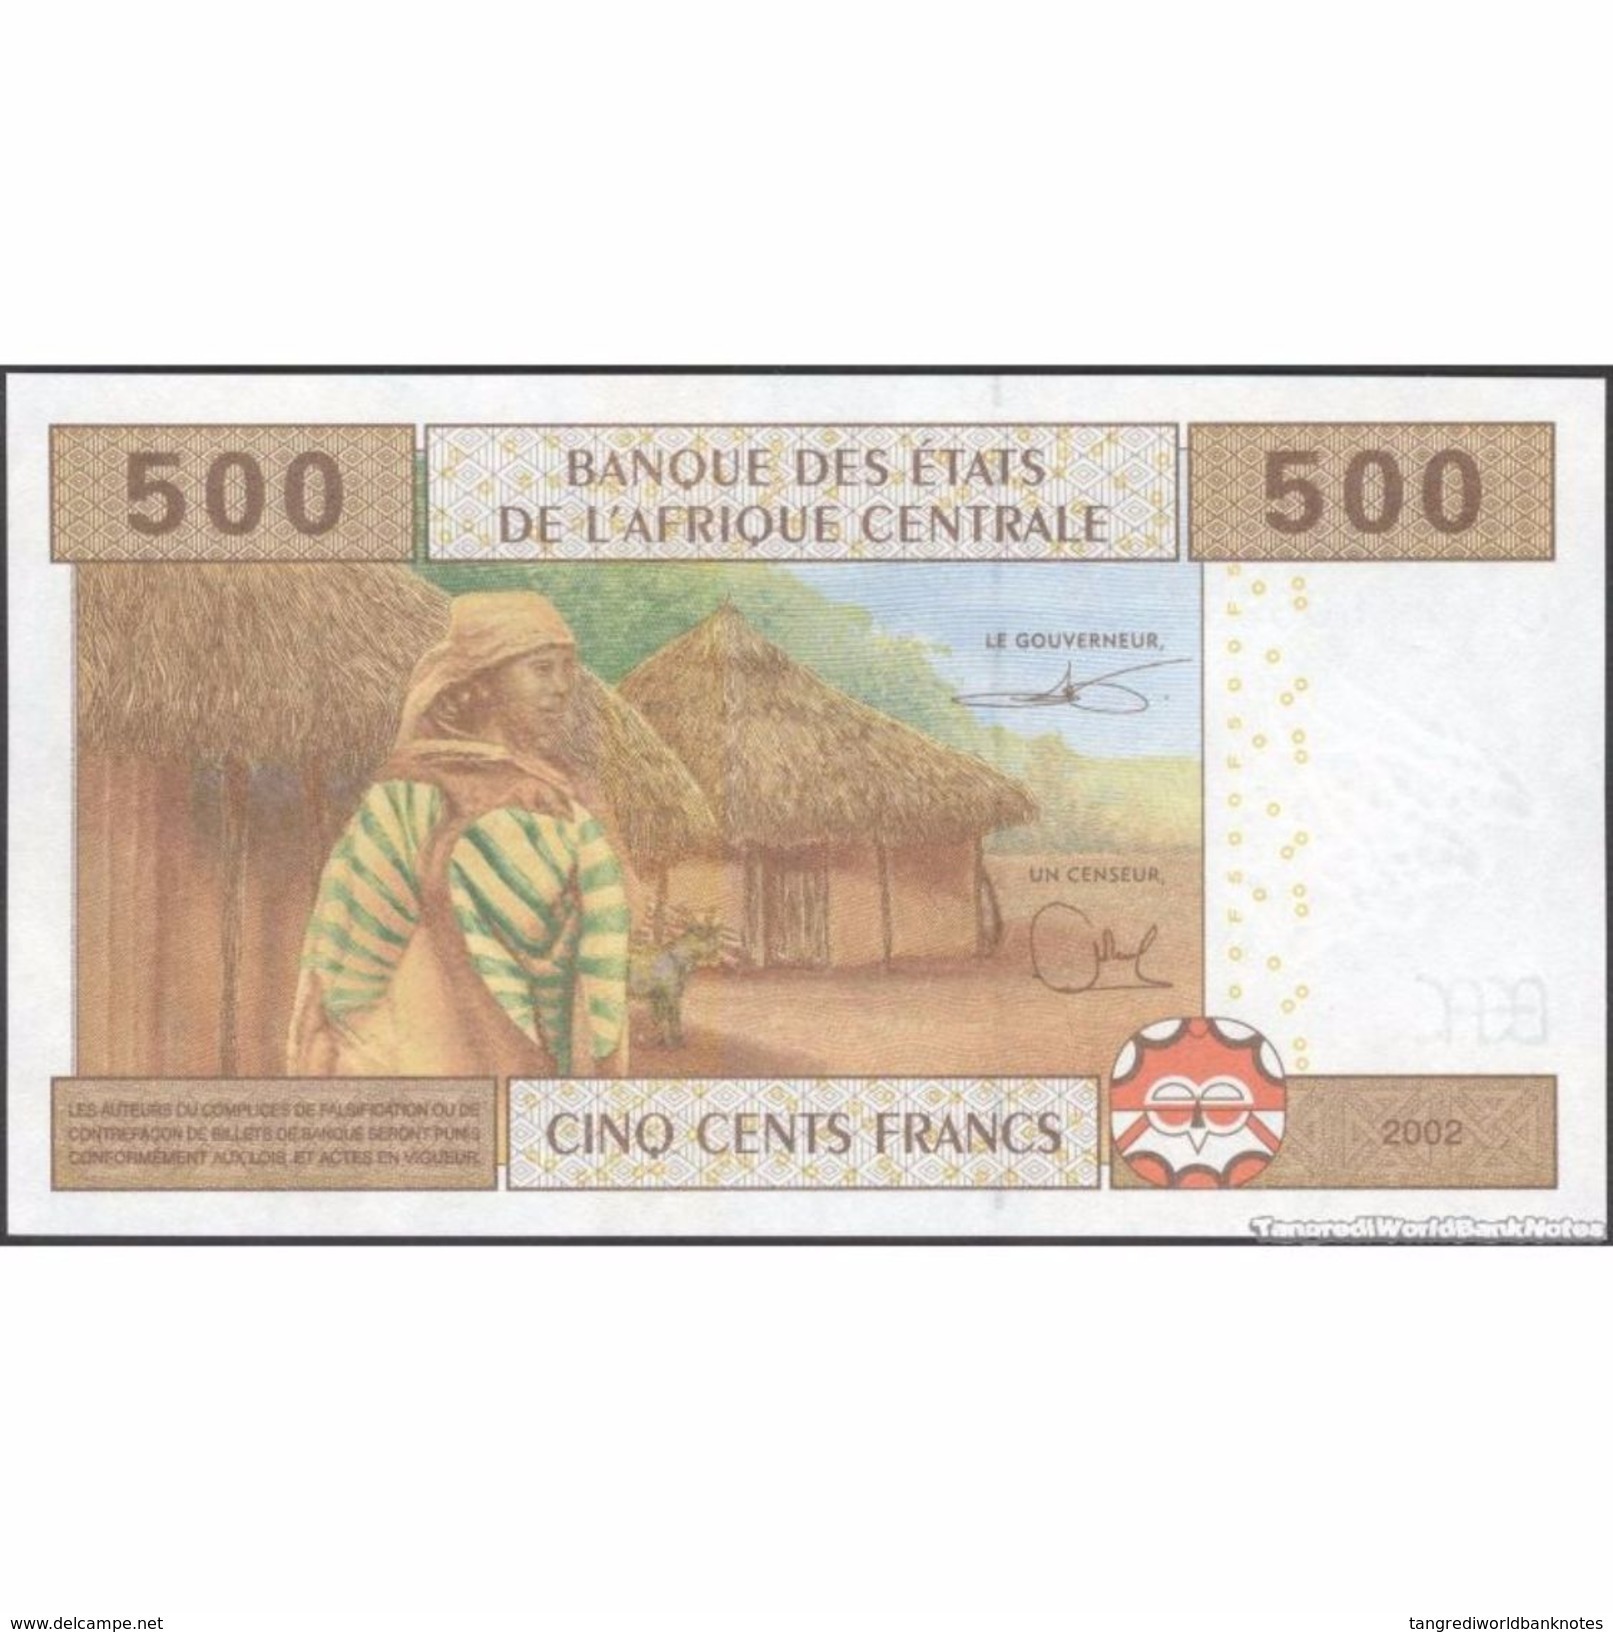 TWN - CAMEROUN 206Ud3 - 500 Francs 2002 (2016) UNC - Centraal-Afrikaanse Staten